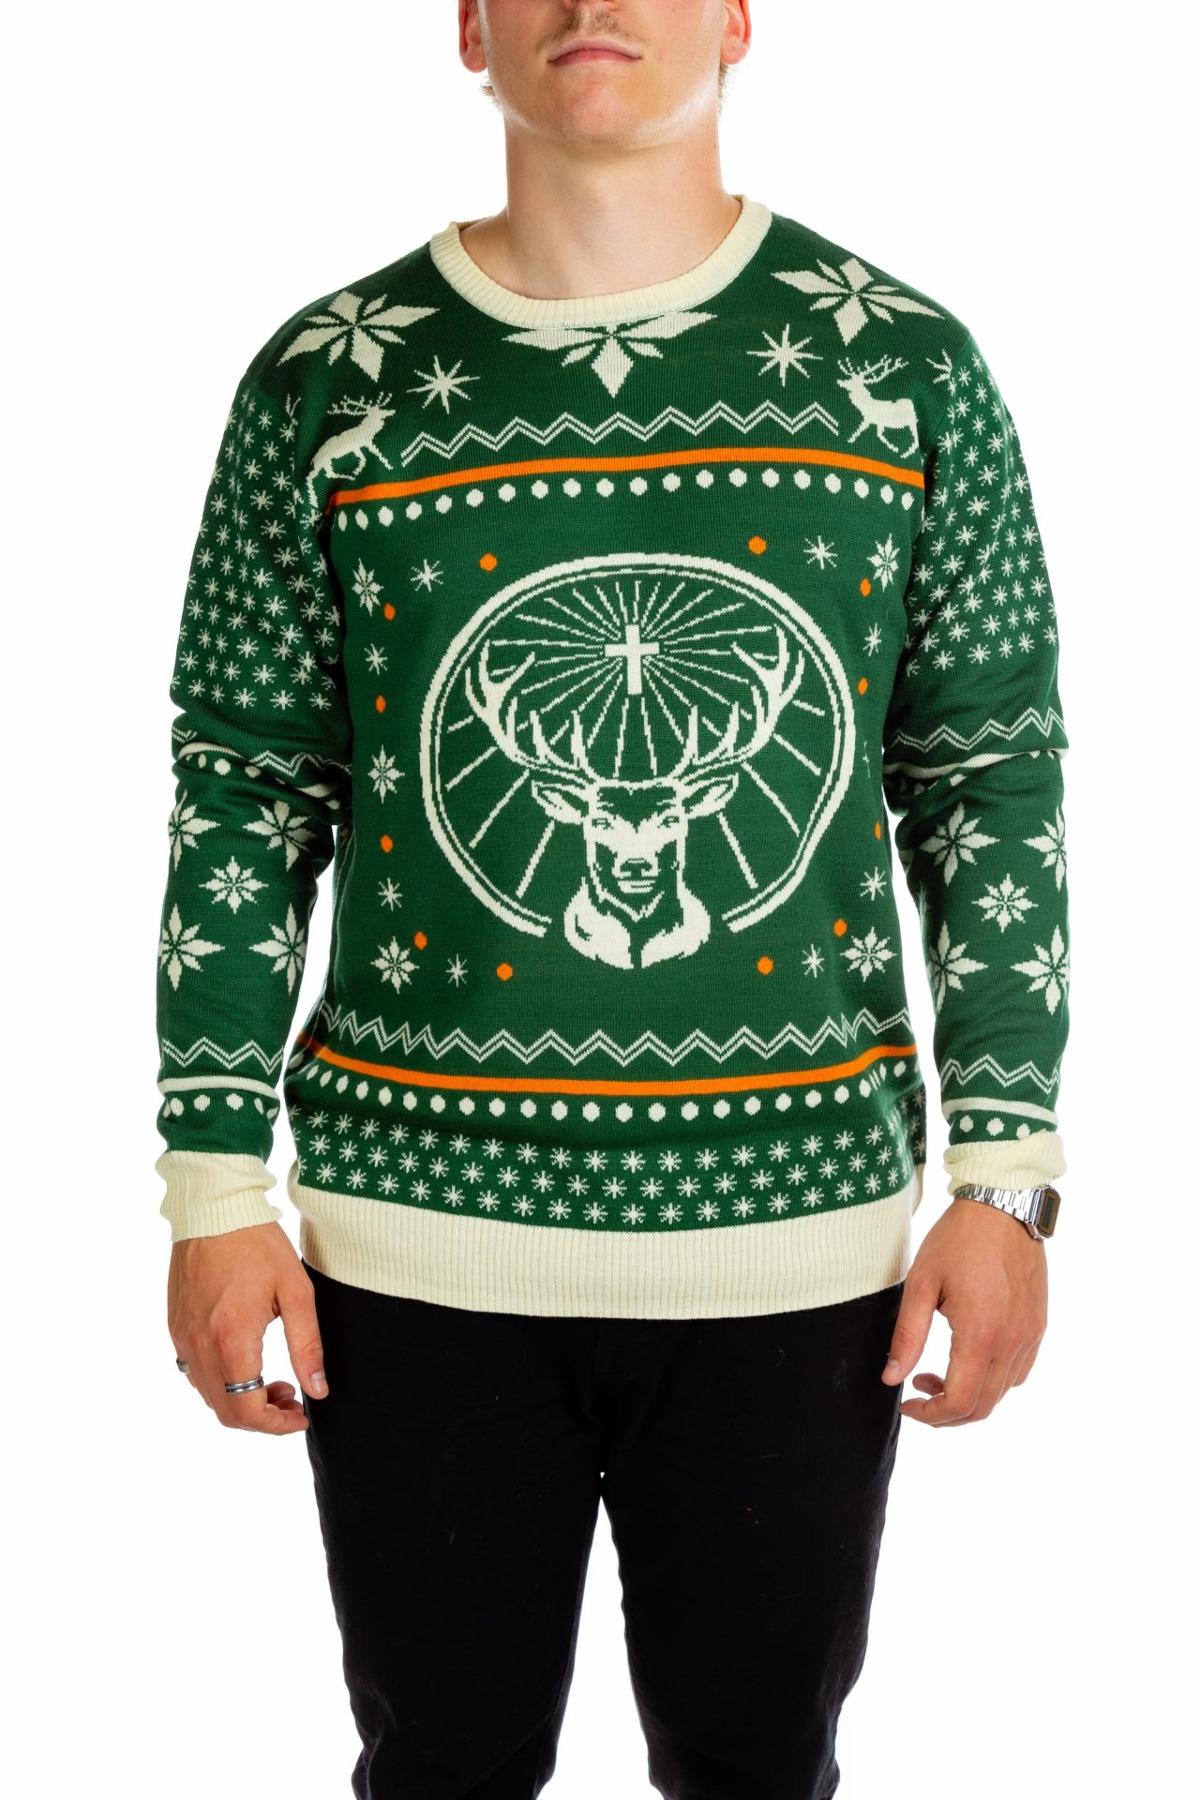 Jć¤germeister Green Ugly Christmas Sweater Best Gift For Fans